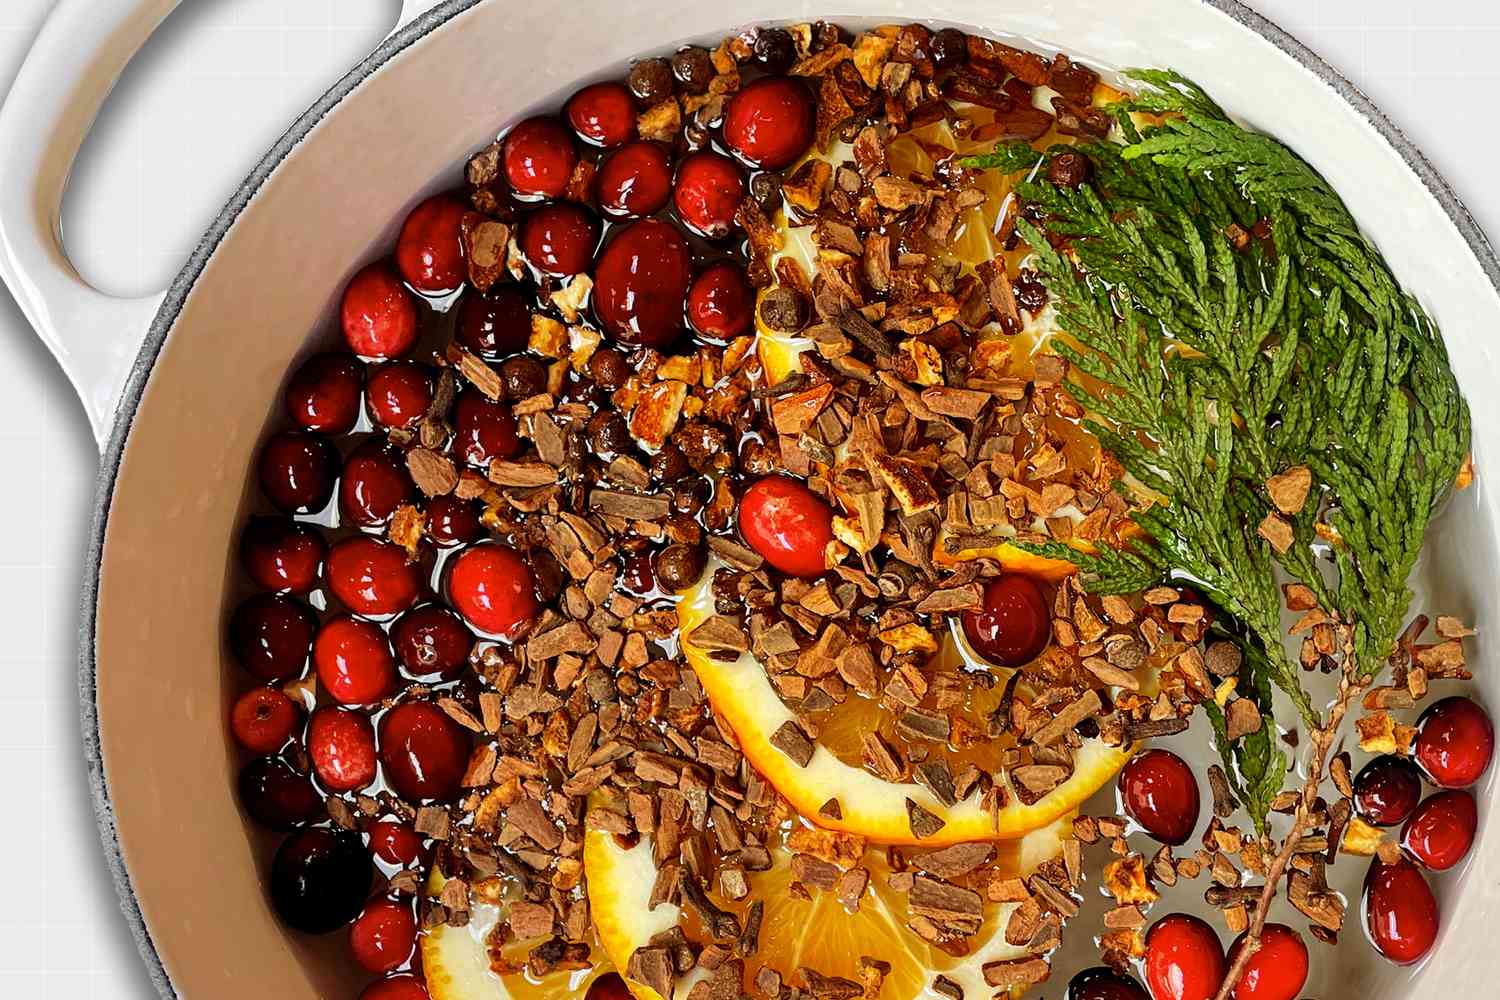 A simmer pot full of oranges, cranberries, a pine branch and cinnamon